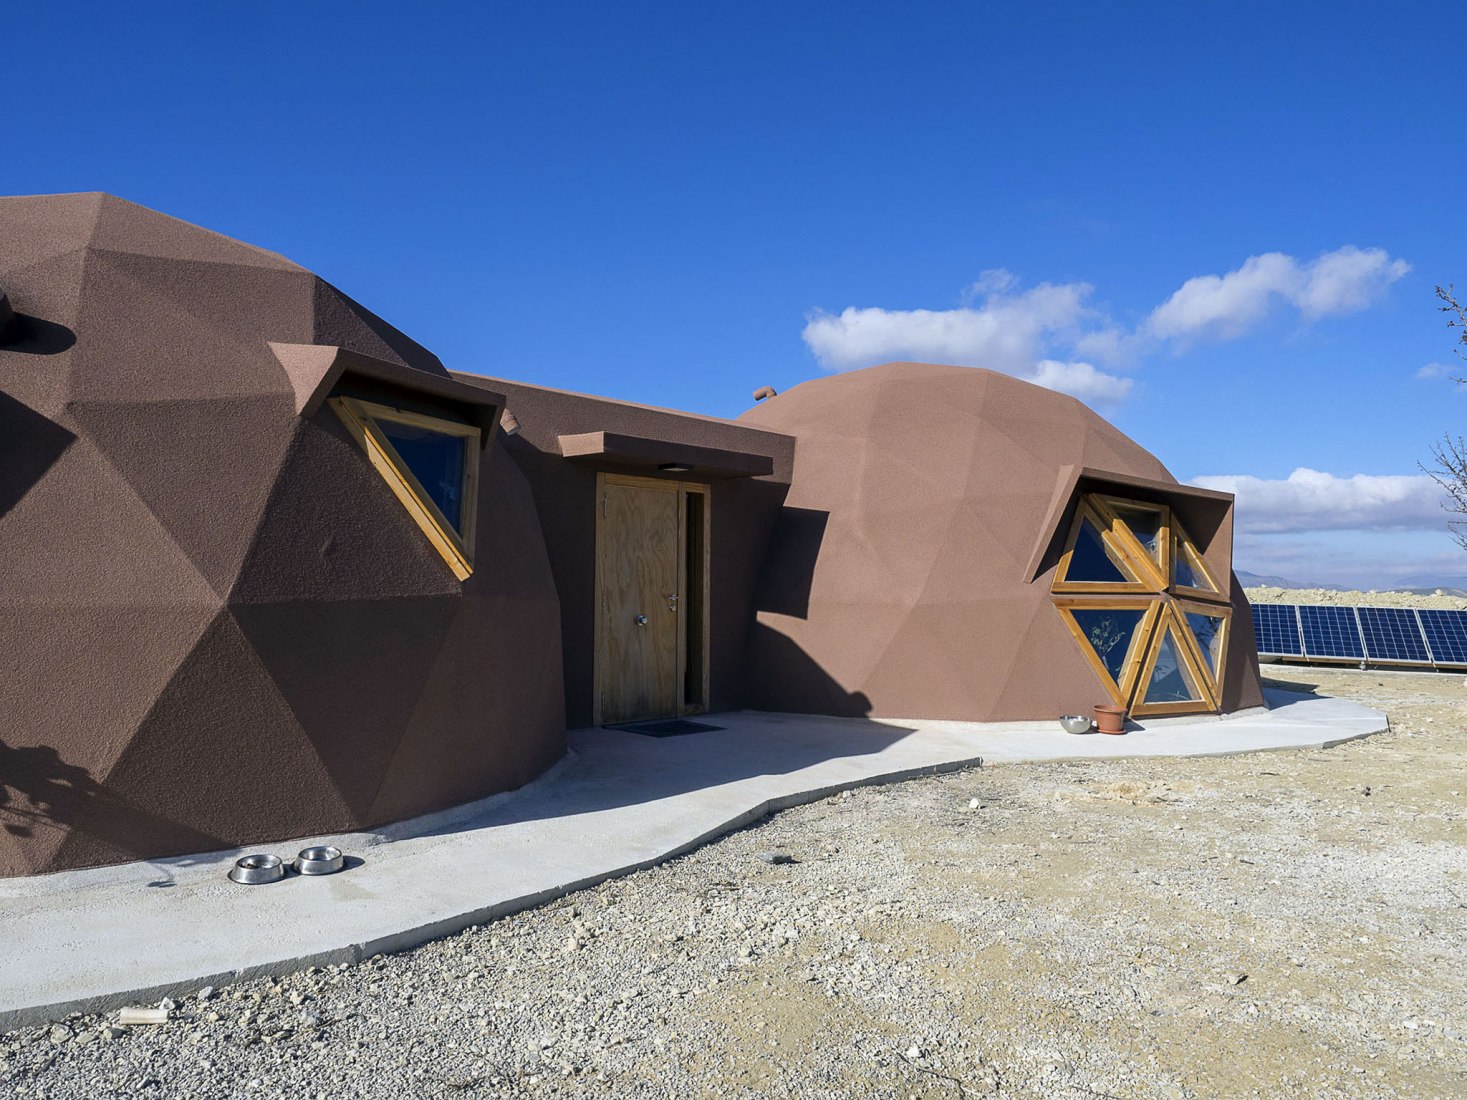 Geodesic and self-sufficient housing by Ecoproyecta. Photograph © Superlumen